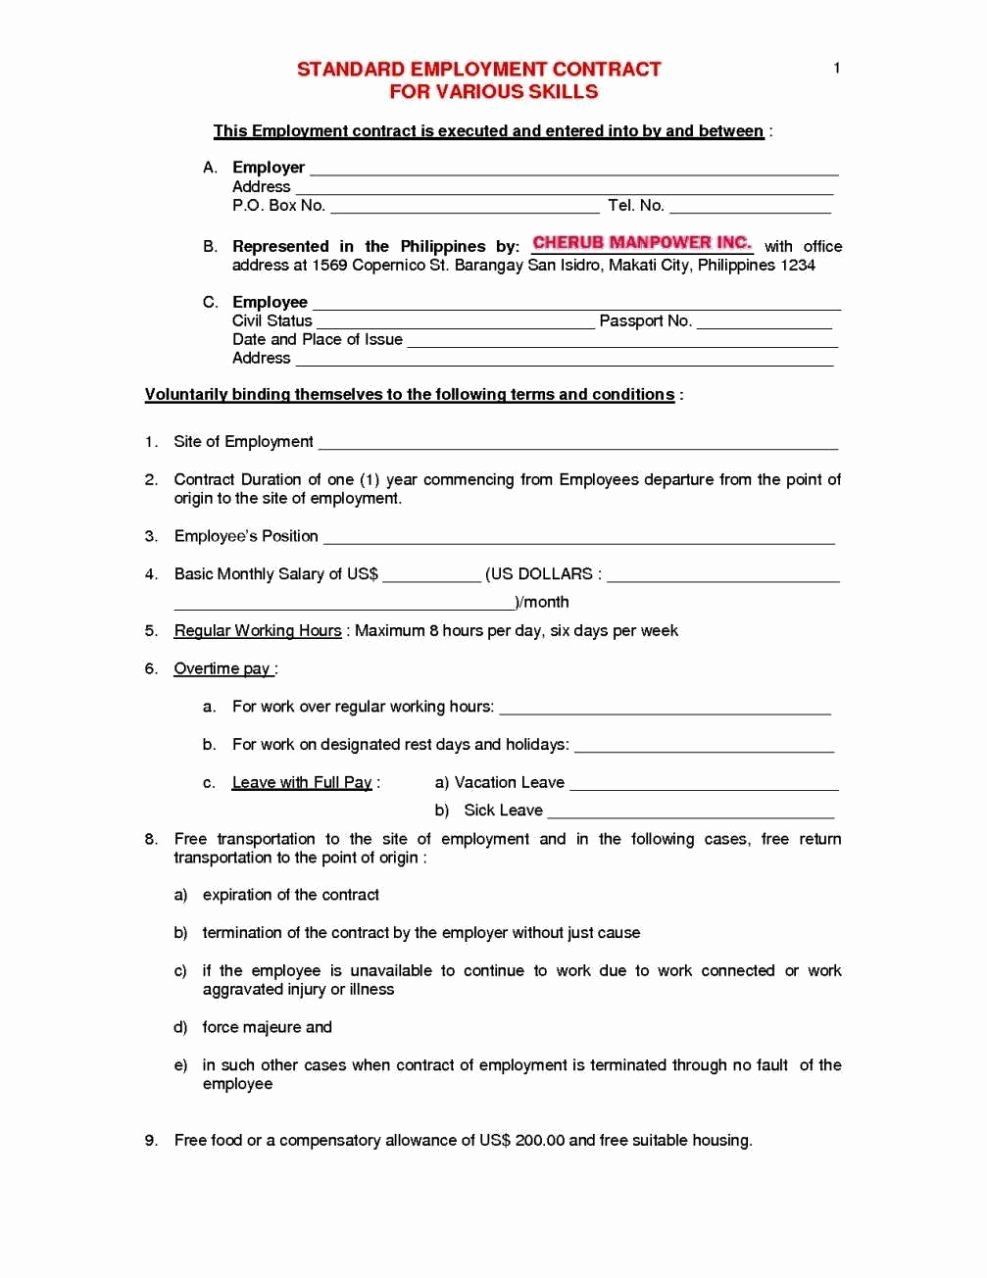 Simple Employment Contract Template Free Unique Basic Employment Contract Template Free Sampletemplatess